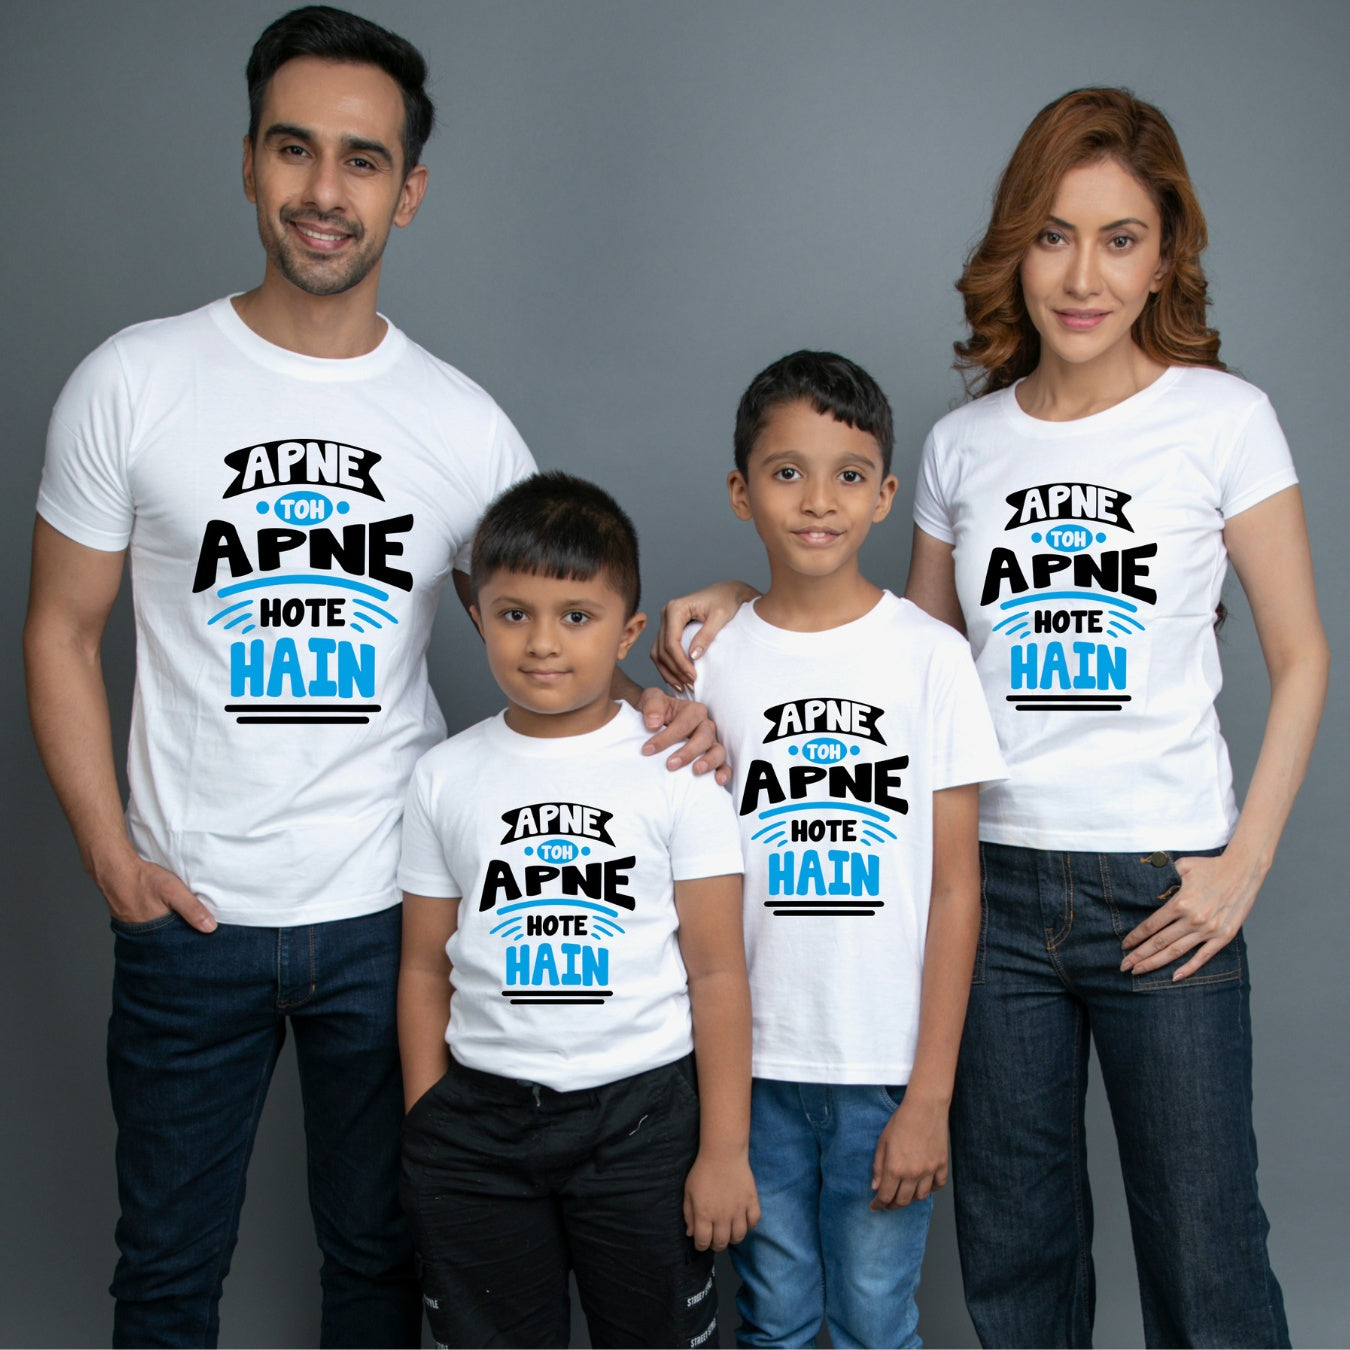 Family t shirts set of 4 Mom Dad Two Sons in White Colour - Apne Toh Apne Hote Hain Variant